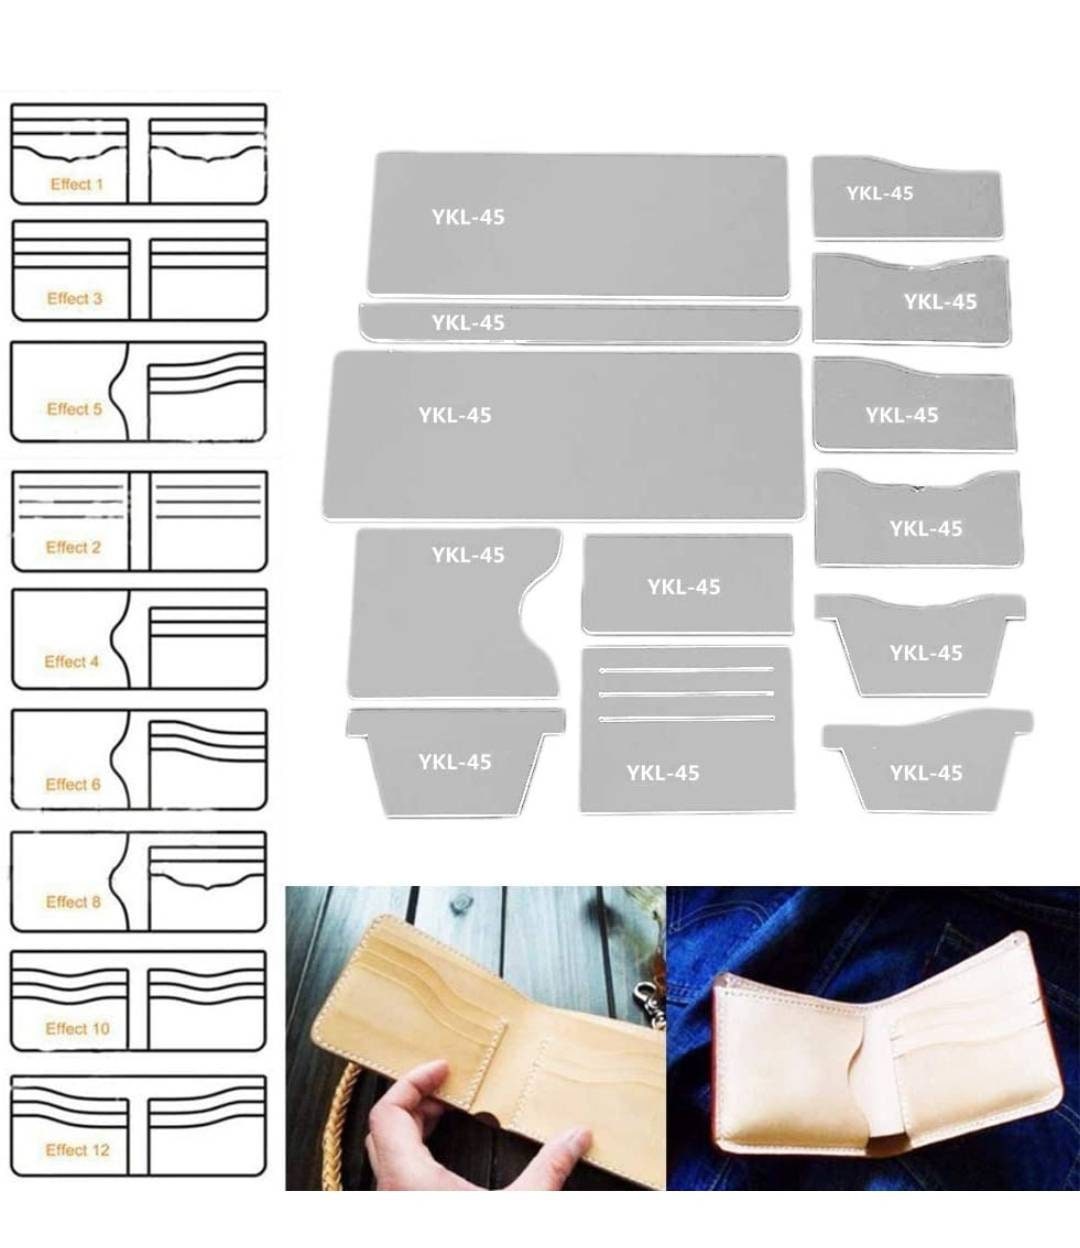  Acrylic Template,Leather Belt Template,Leather Clutch Purse  Template,Leather Patterns Templates 5Pcs Translucent Belt Buckle Holes  Templates Leather Punching Craft Module DIY Tool : Arts, Crafts & Sewing